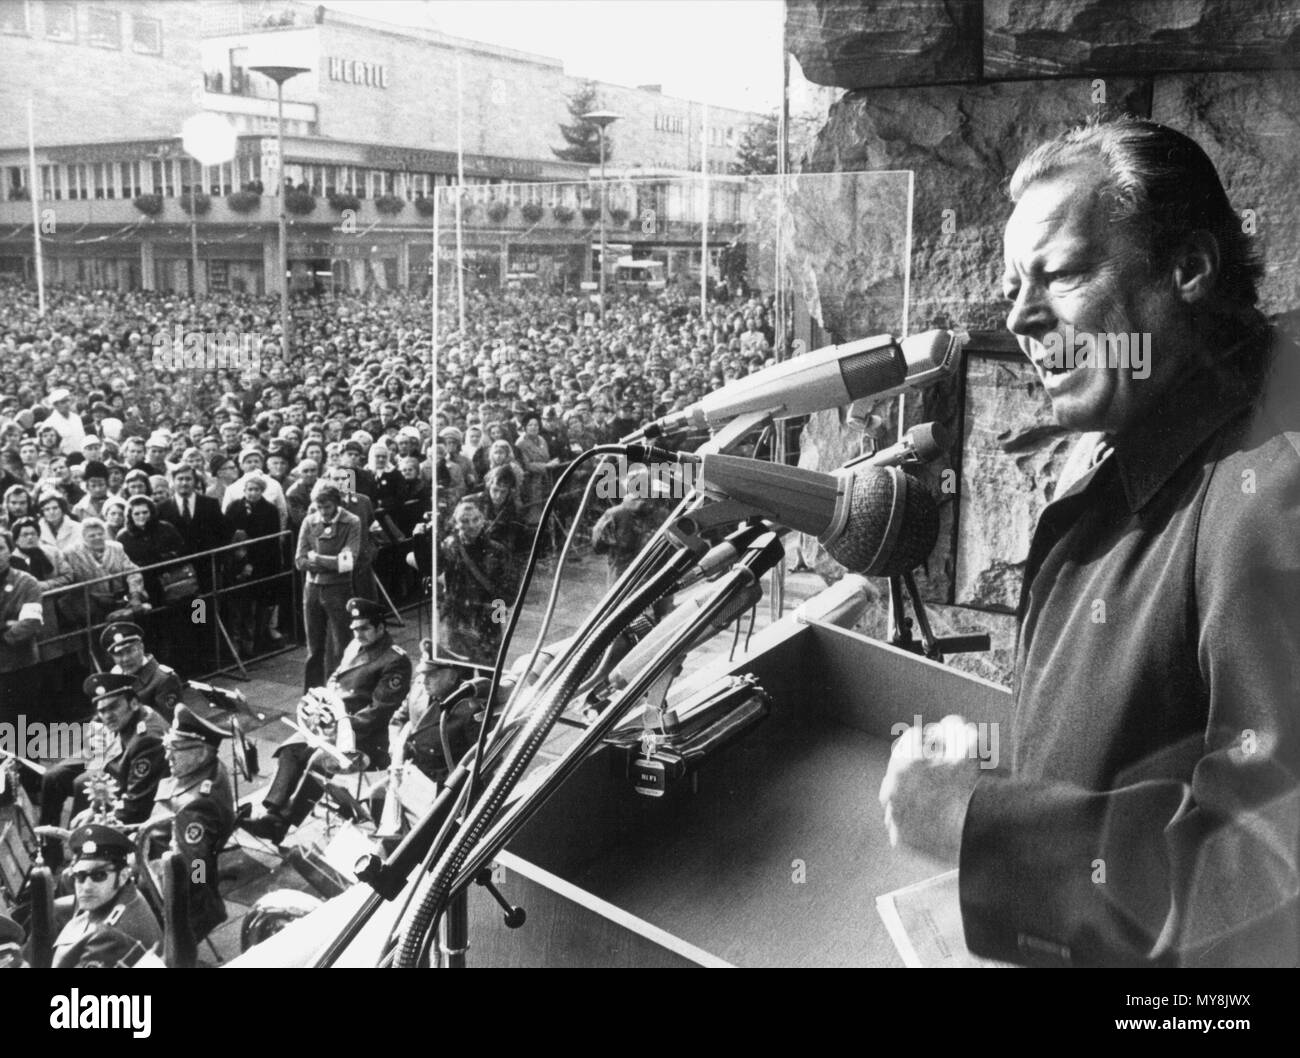 German Chancellor Willy Brandt (SPD) speaking to thousands of people during an election rally in Mainz, Germany, on 15 November 1972. Increased security measures during this election campaign include bullet-proof glass panels at the rostrum.  | usage worldwide Stock Photo